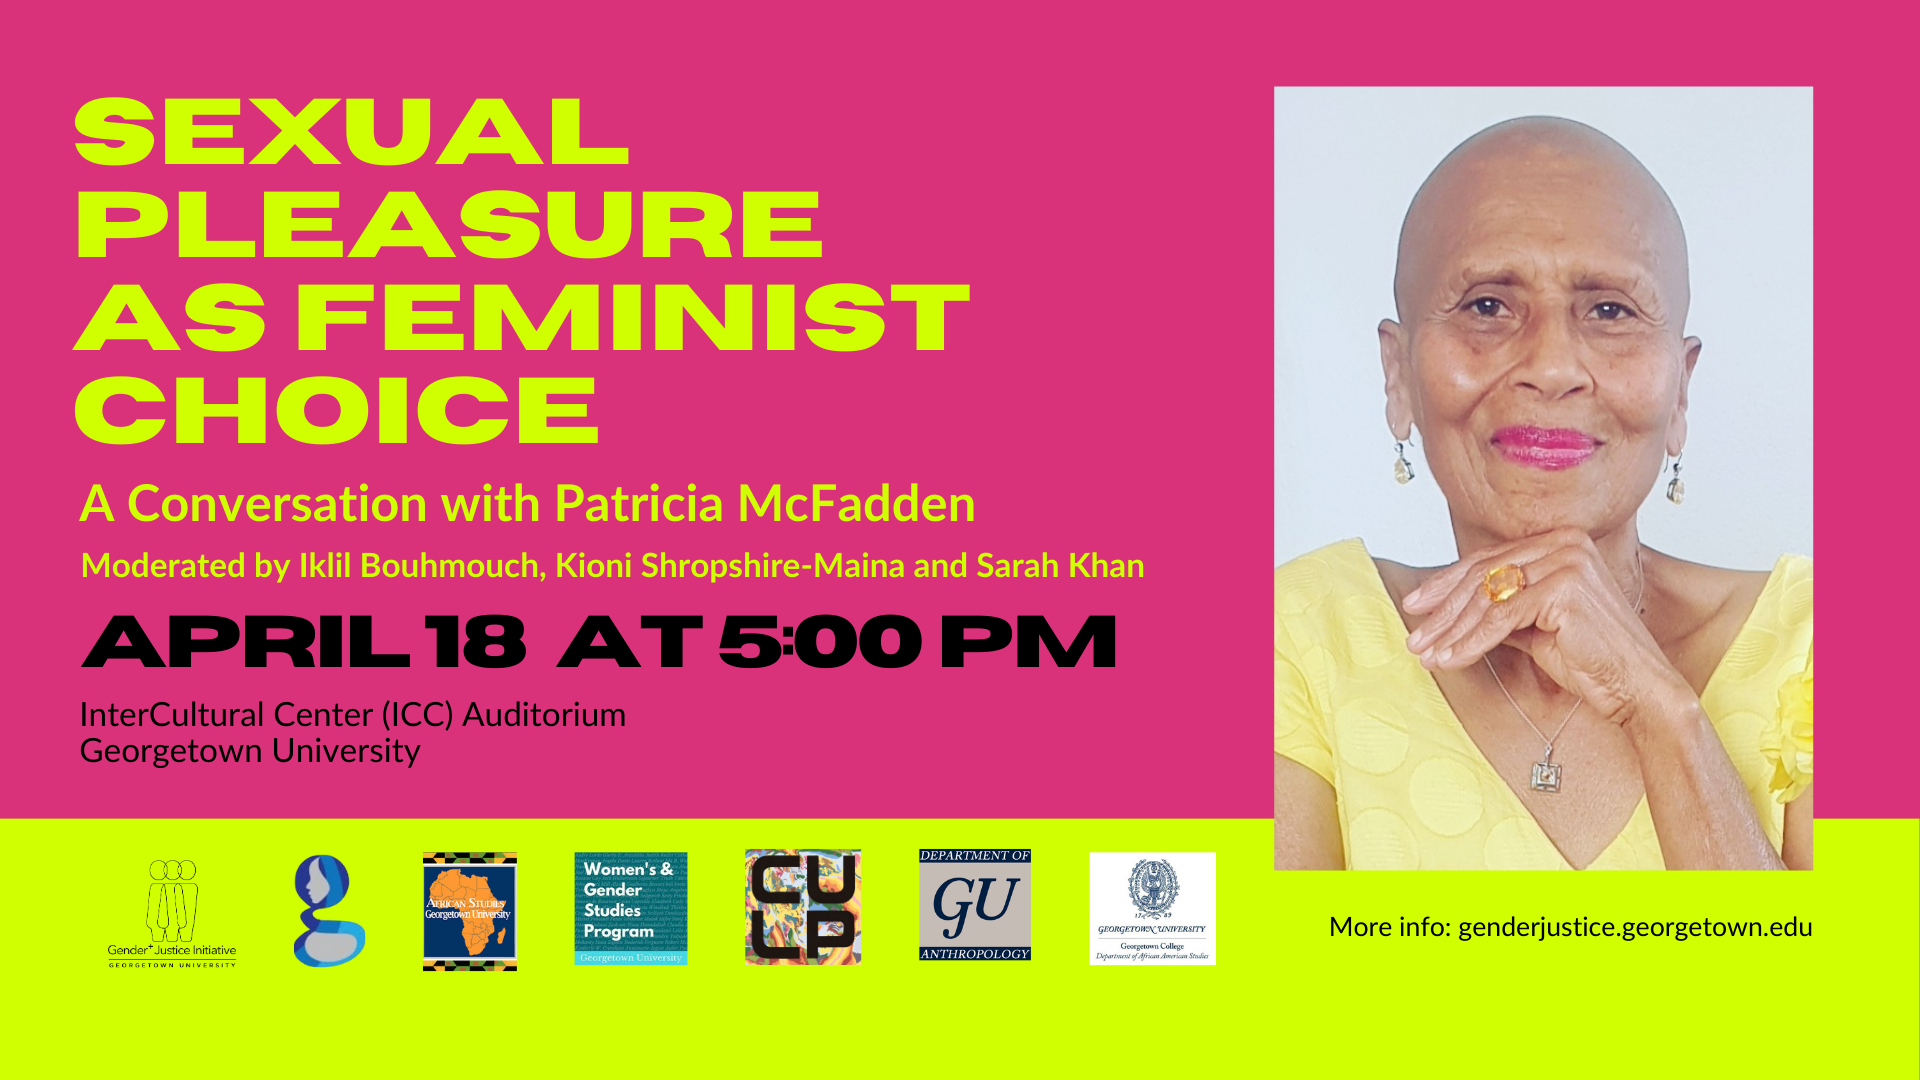 flyer for event, pink and neon yellow background with black text, headshot of speaker to right, black woman smiling wearing a yellow top